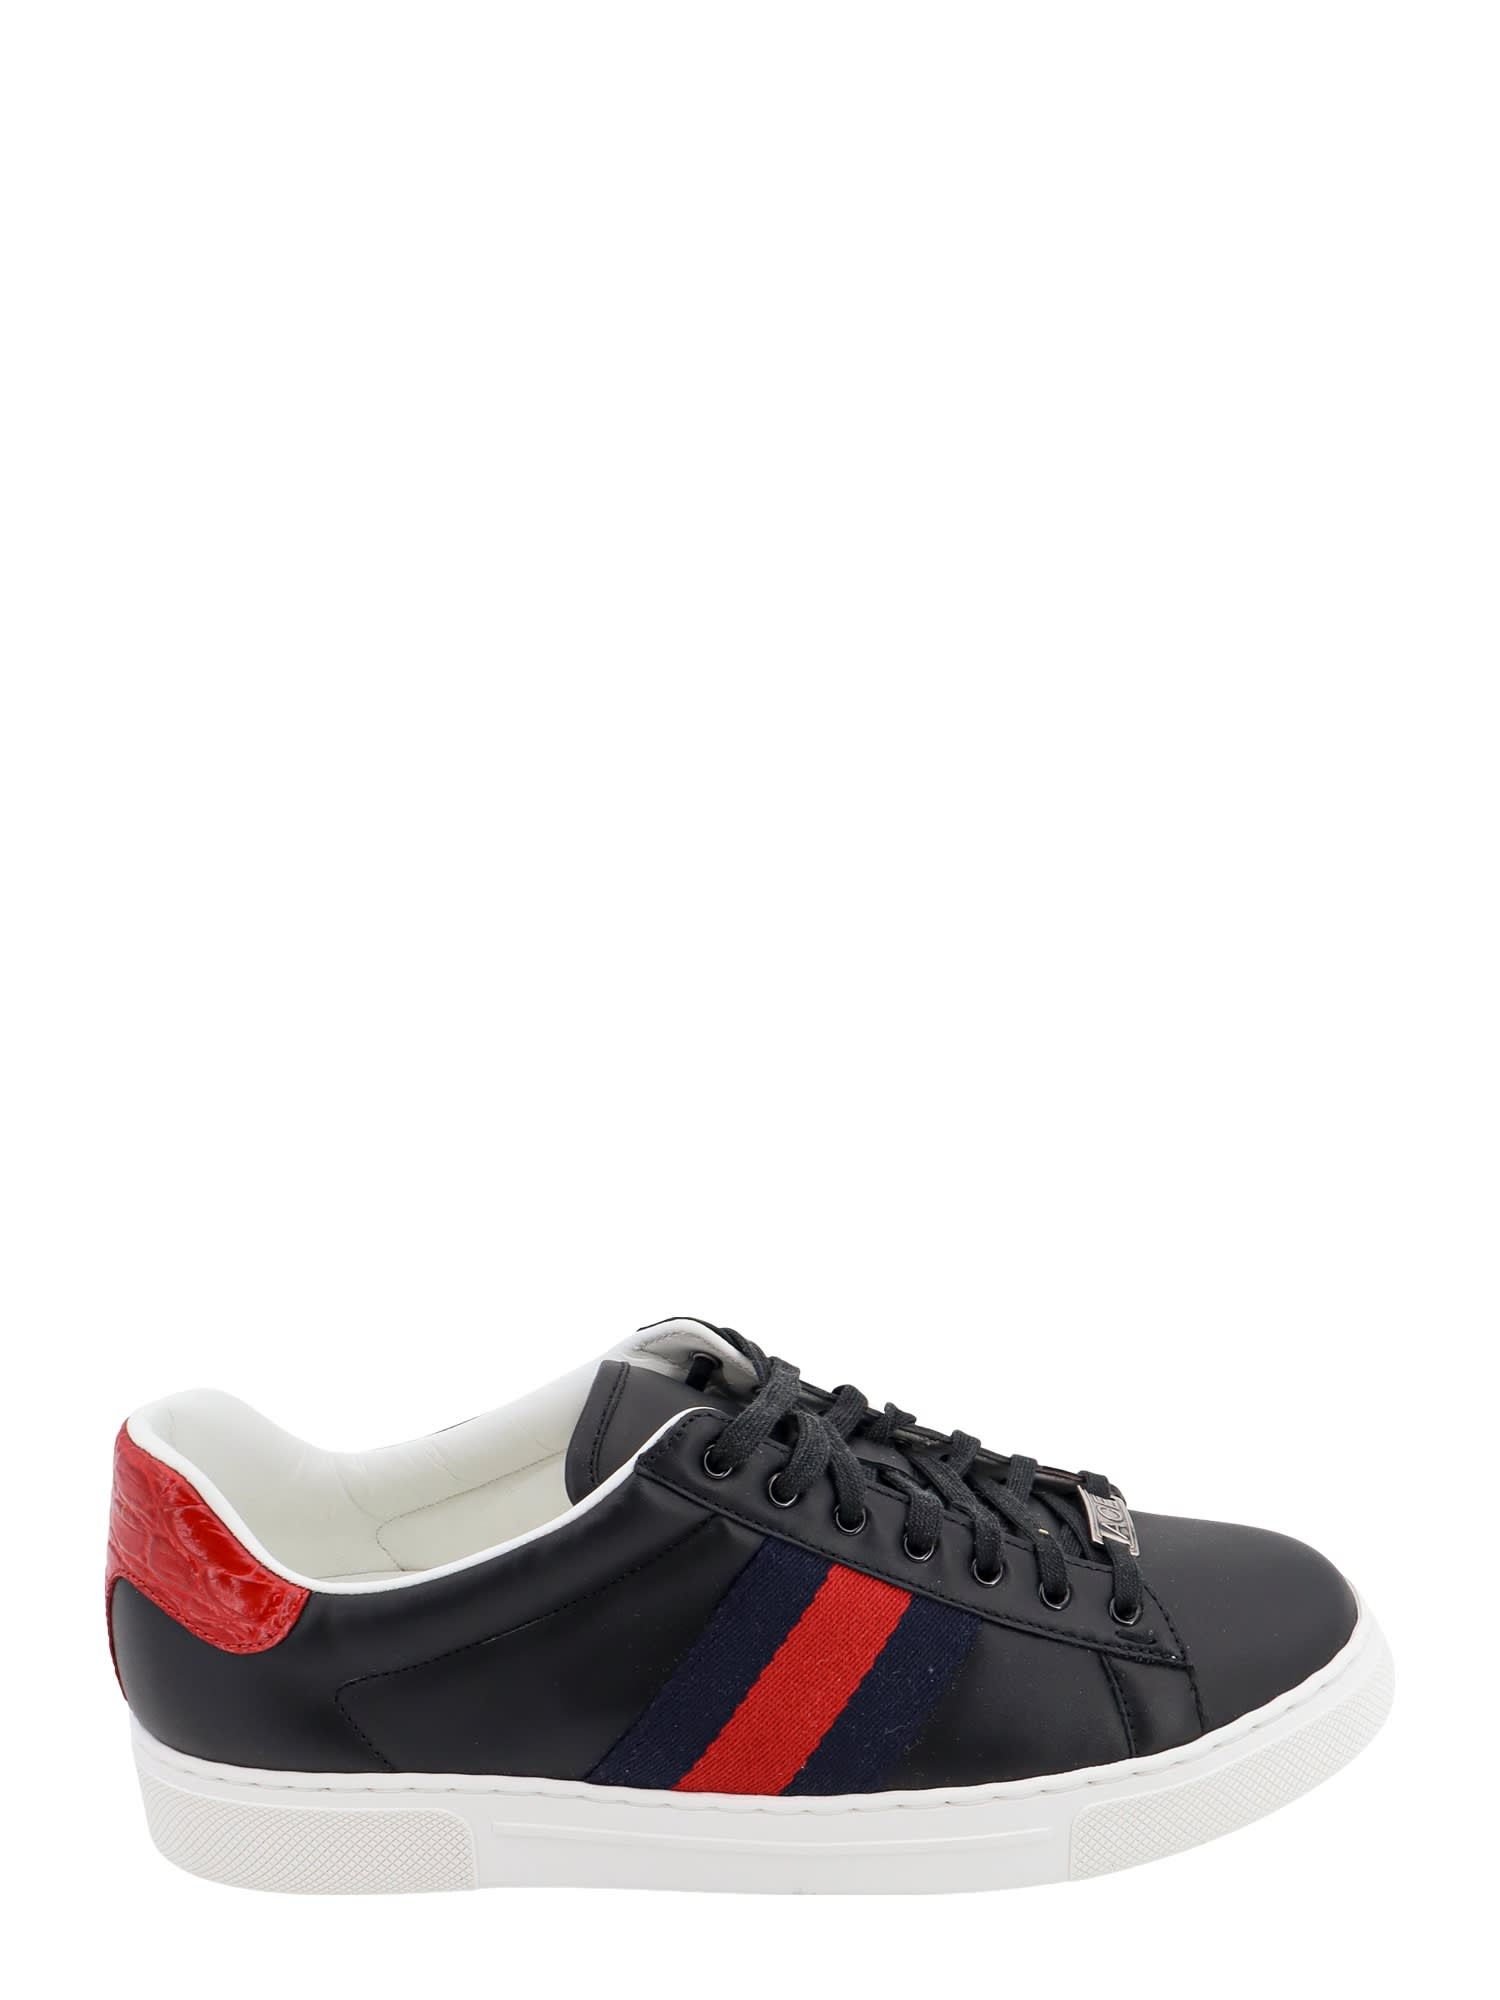 Gucci Ace Sneakers In Black